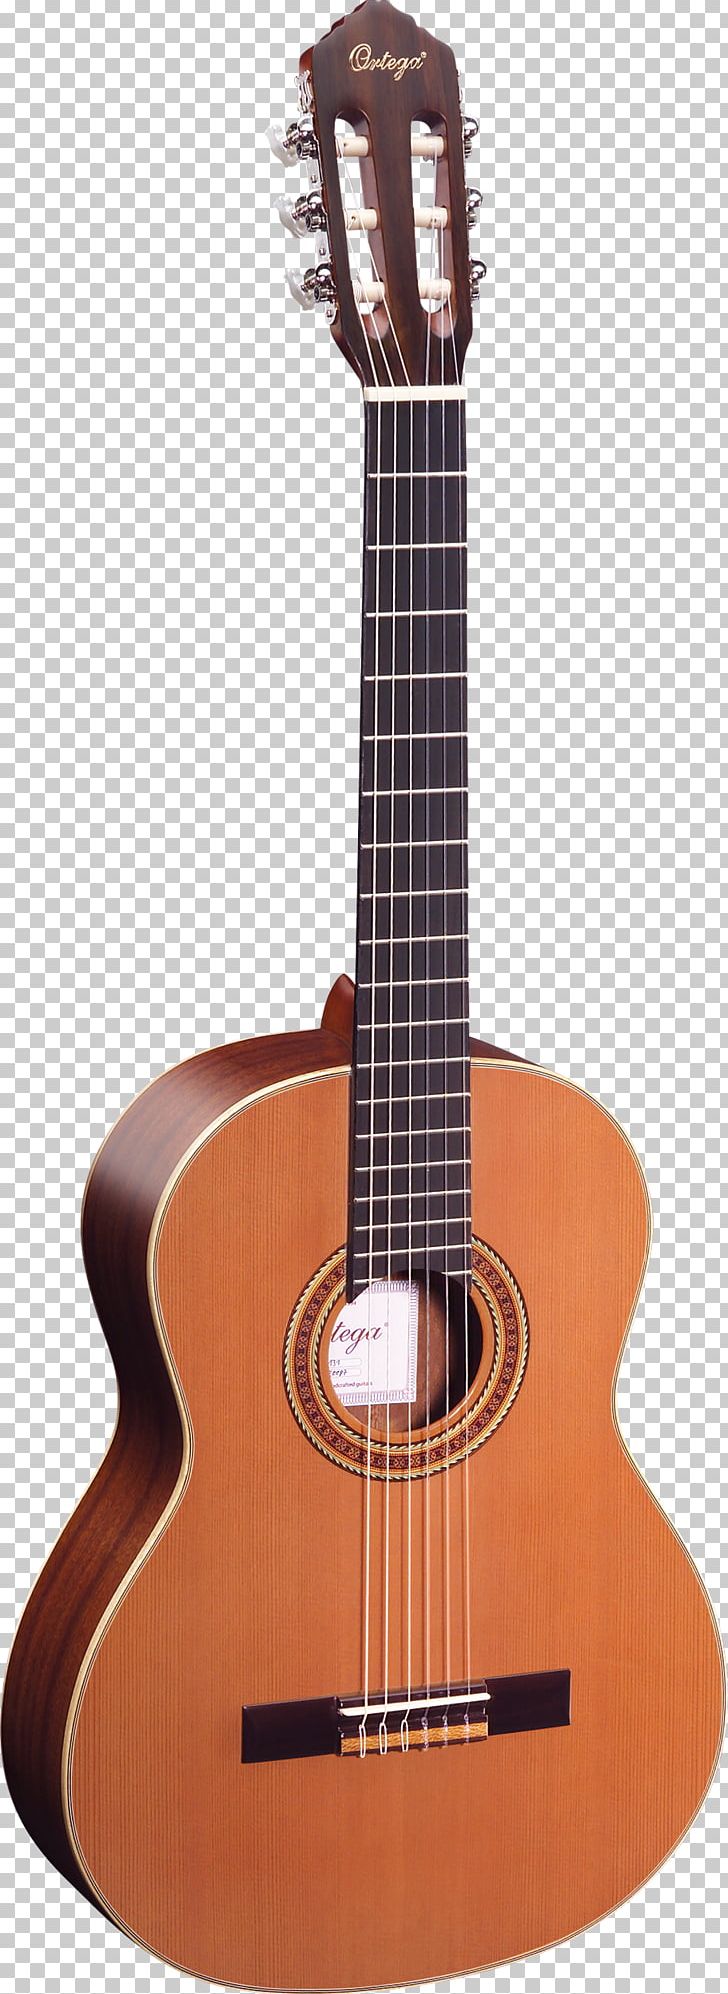 Fender Bullet Steel-string Acoustic Guitar Classical Guitar Musical Instruments PNG, Clipart, Acoustic Electric Guitar, Amancio Ortega, Classical Guitar, Cuatro, Cutaway Free PNG Download